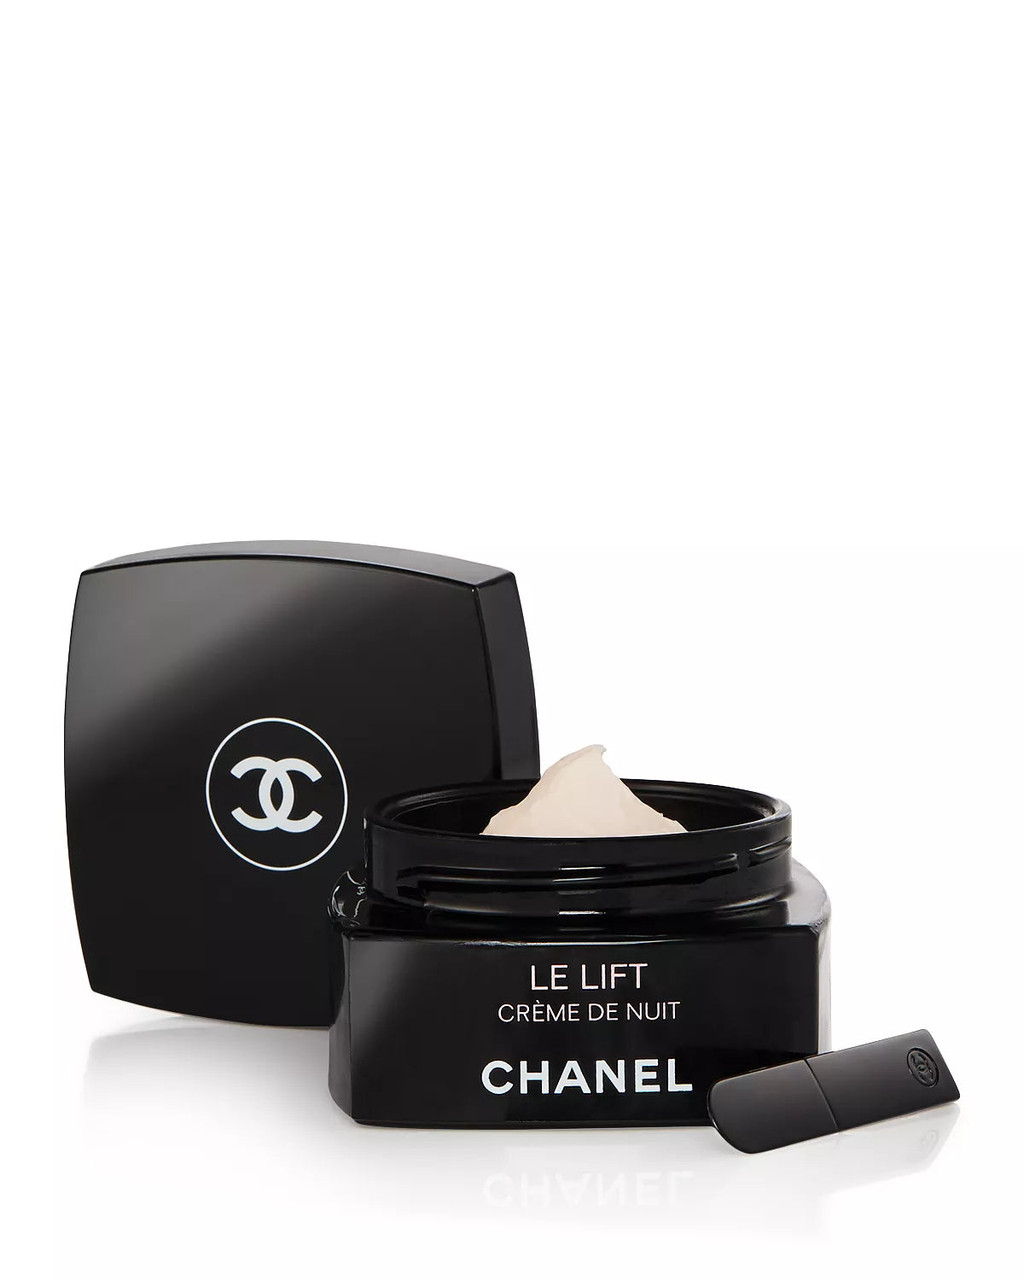 Chanel Le Lift Creme Night 1.7 Cream g Firming De - Smoothing and 50 Nuit oz